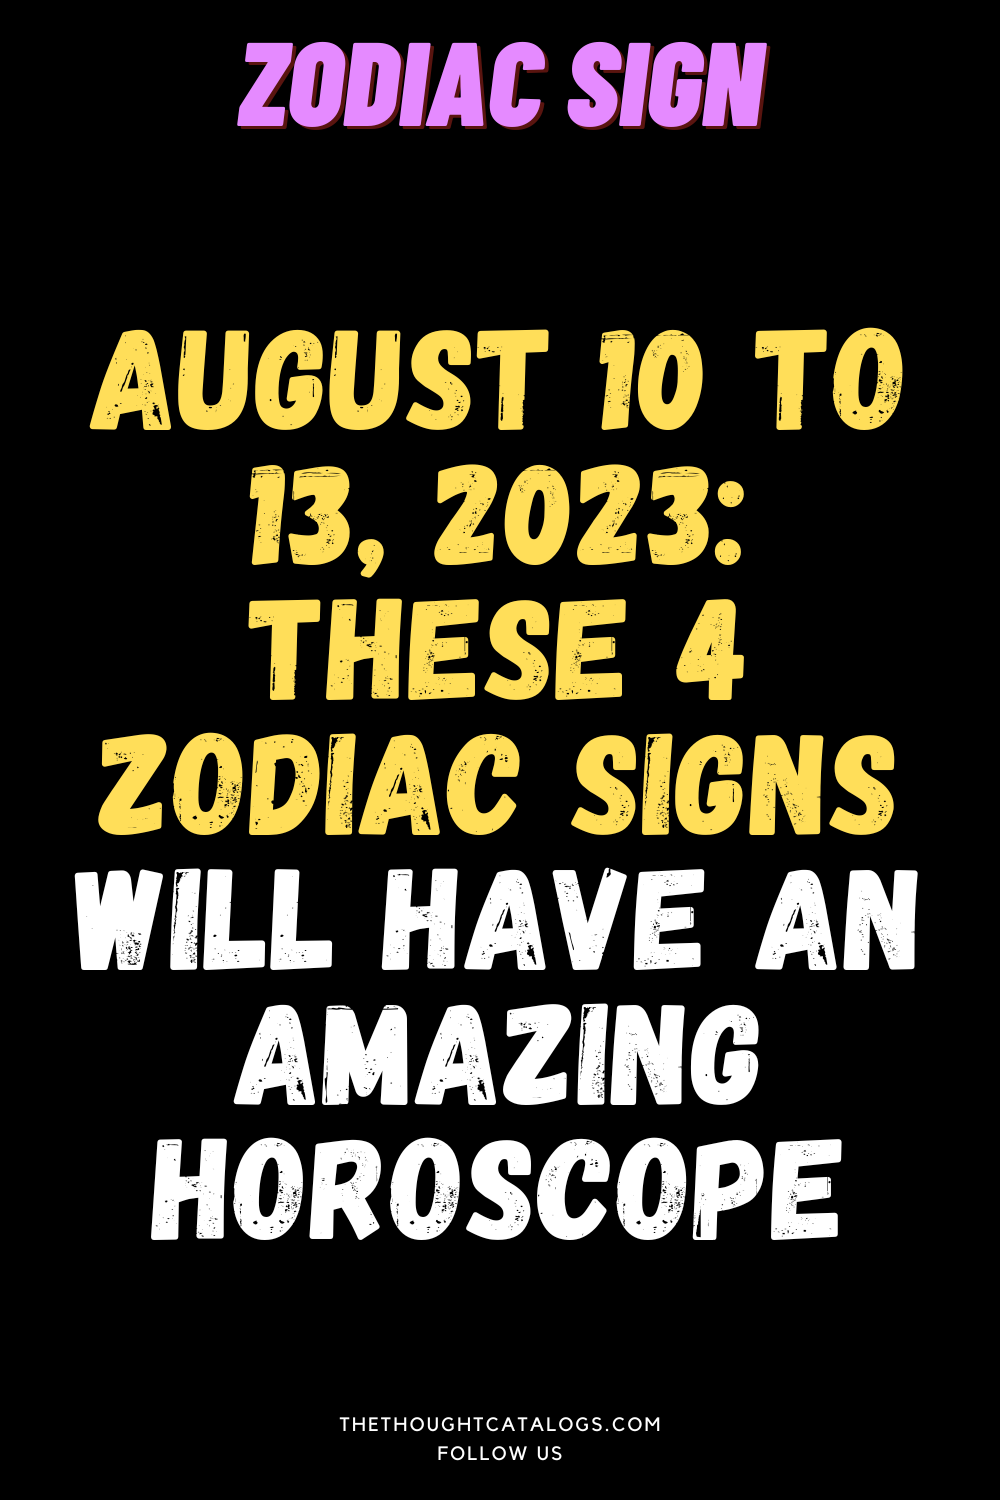 These 4 Zodiac Signs Will Have An Amazing Horoscope